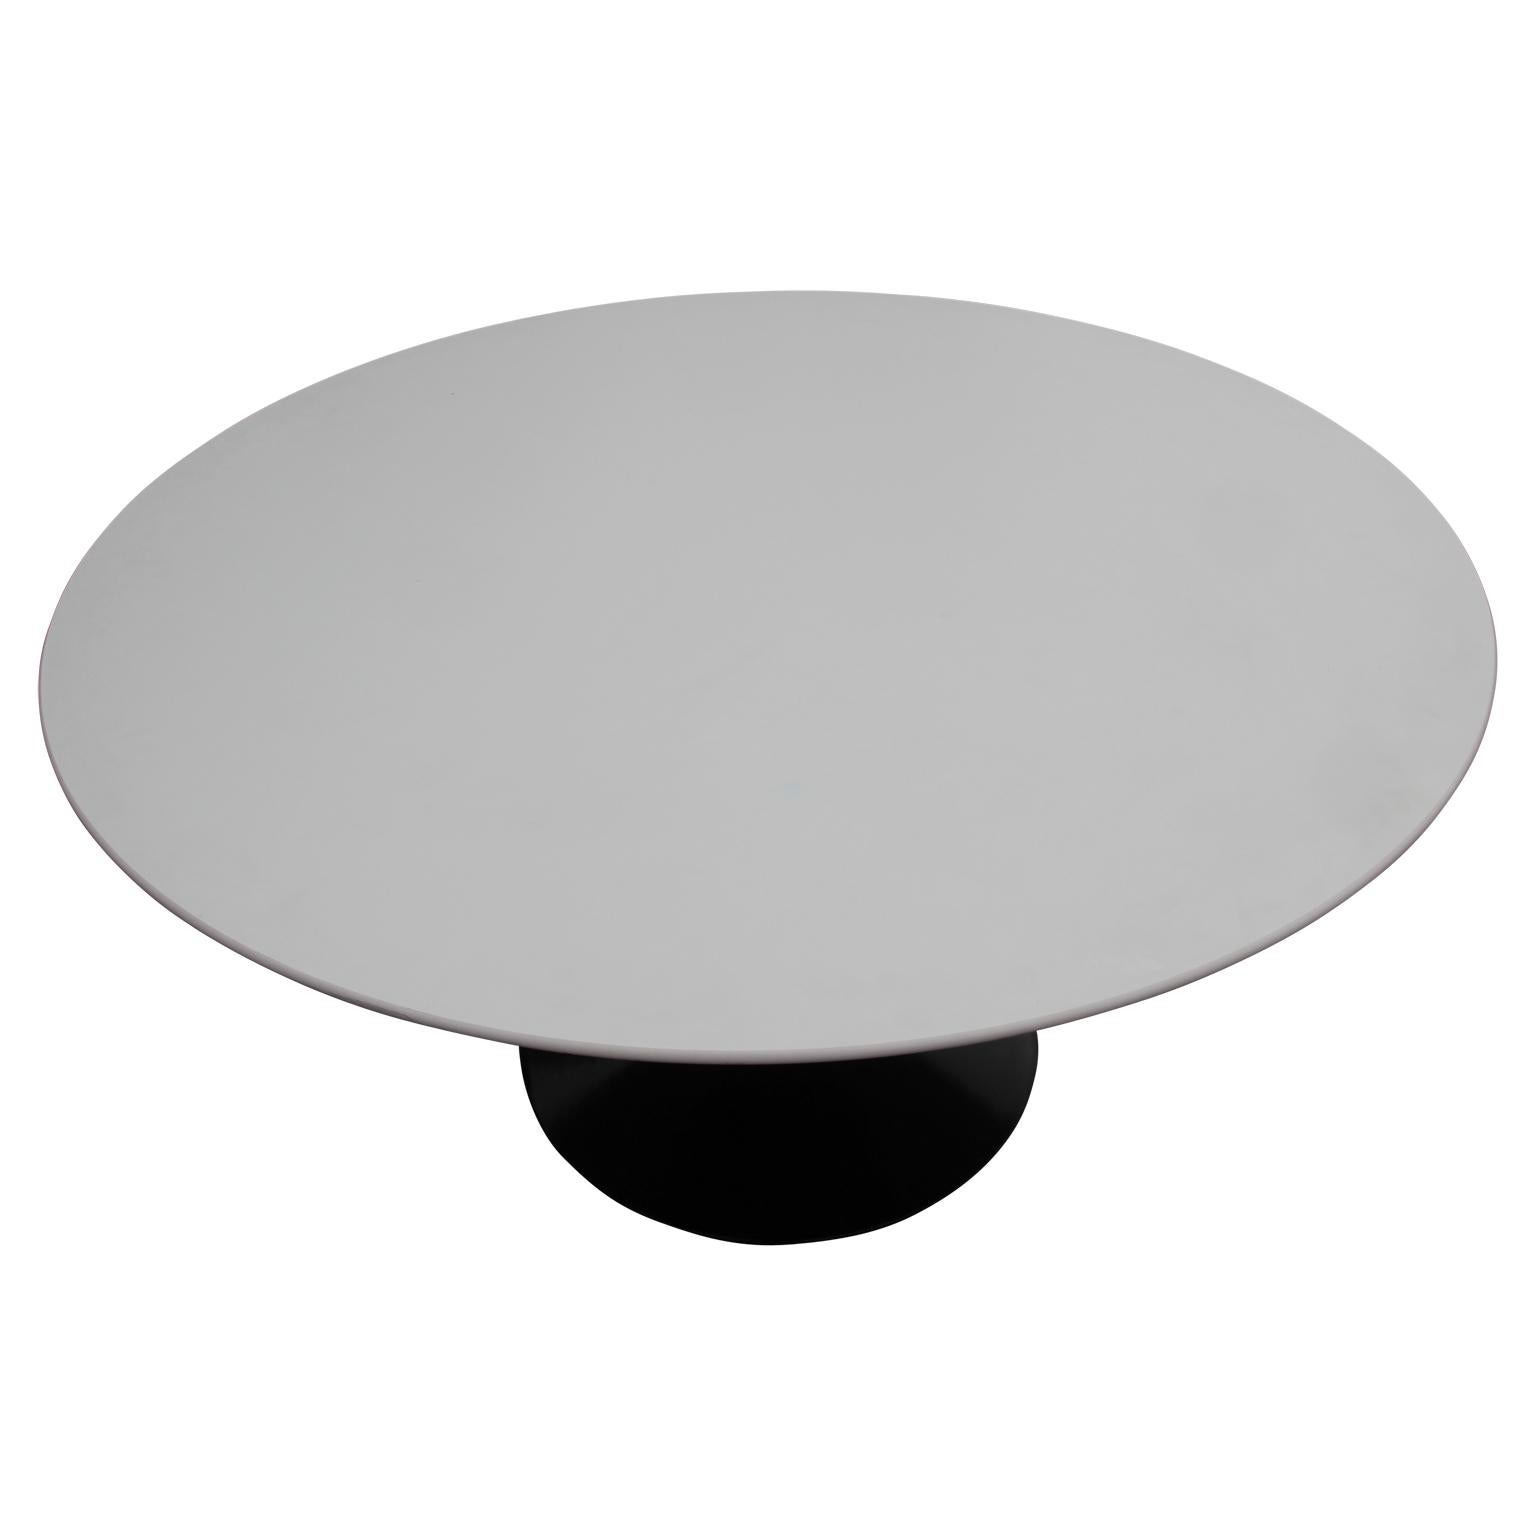 American Sleek Modern Black and White Knoll Round Tulip Dining Table